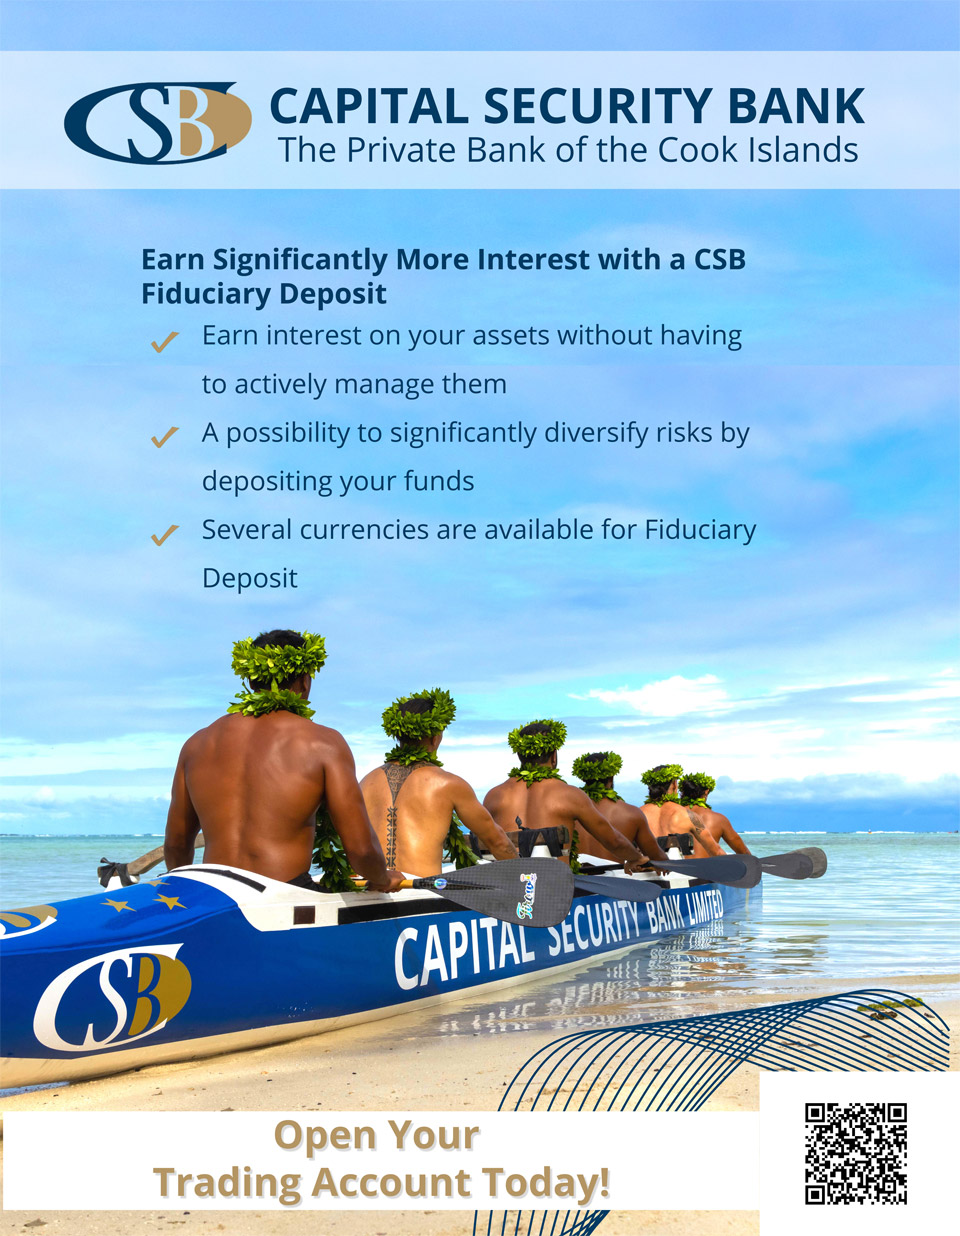 CSB Fiduciary Deposits - The Cook Islands